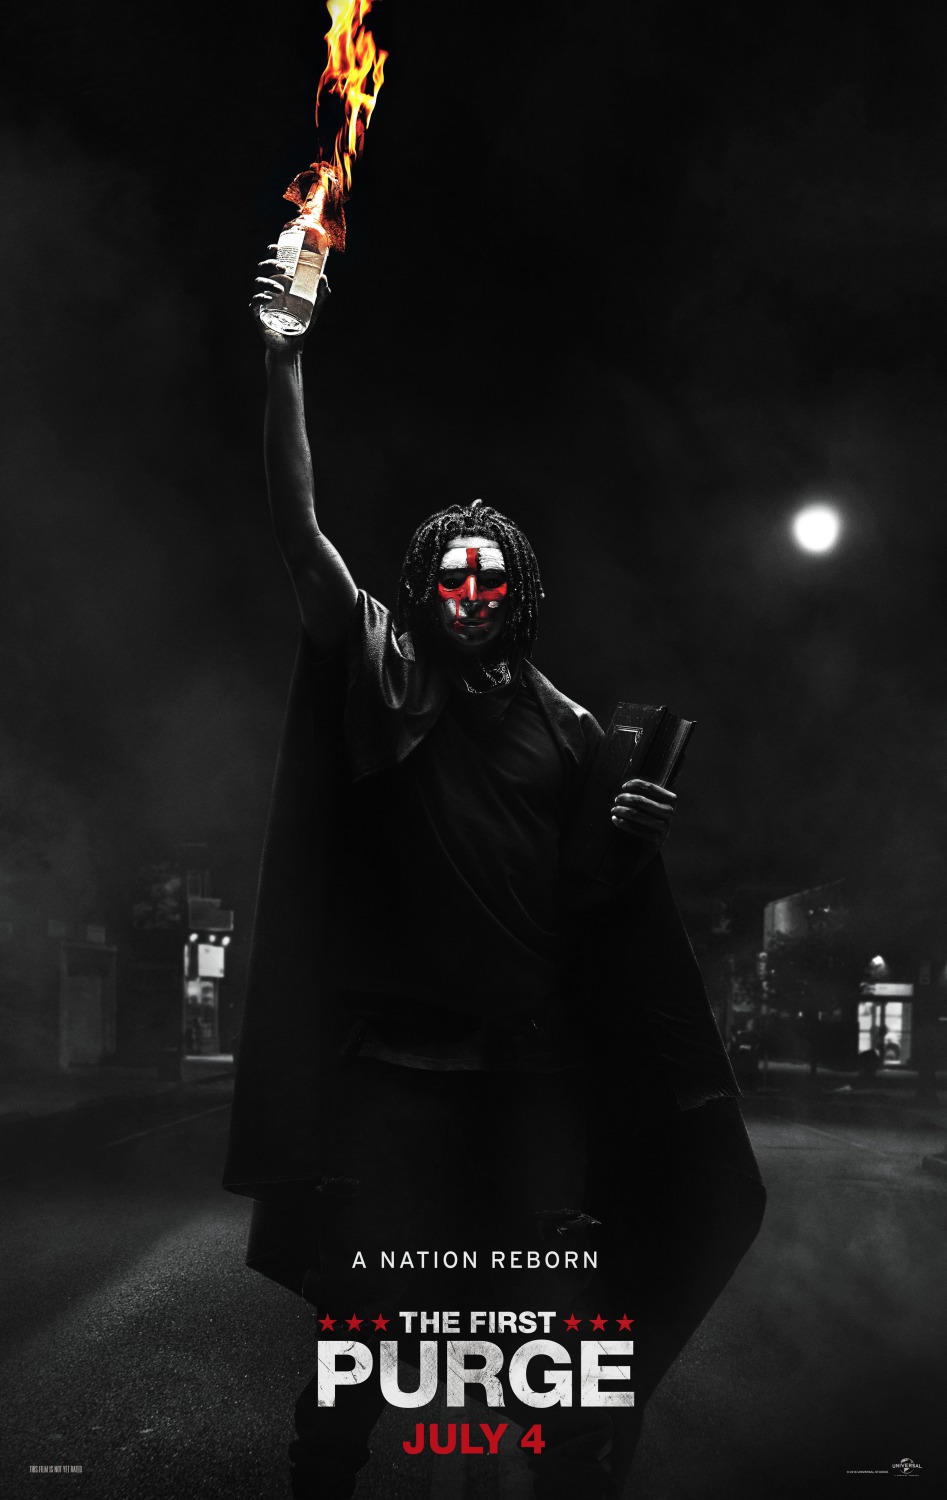 The First Purge film review: ideologically muddled